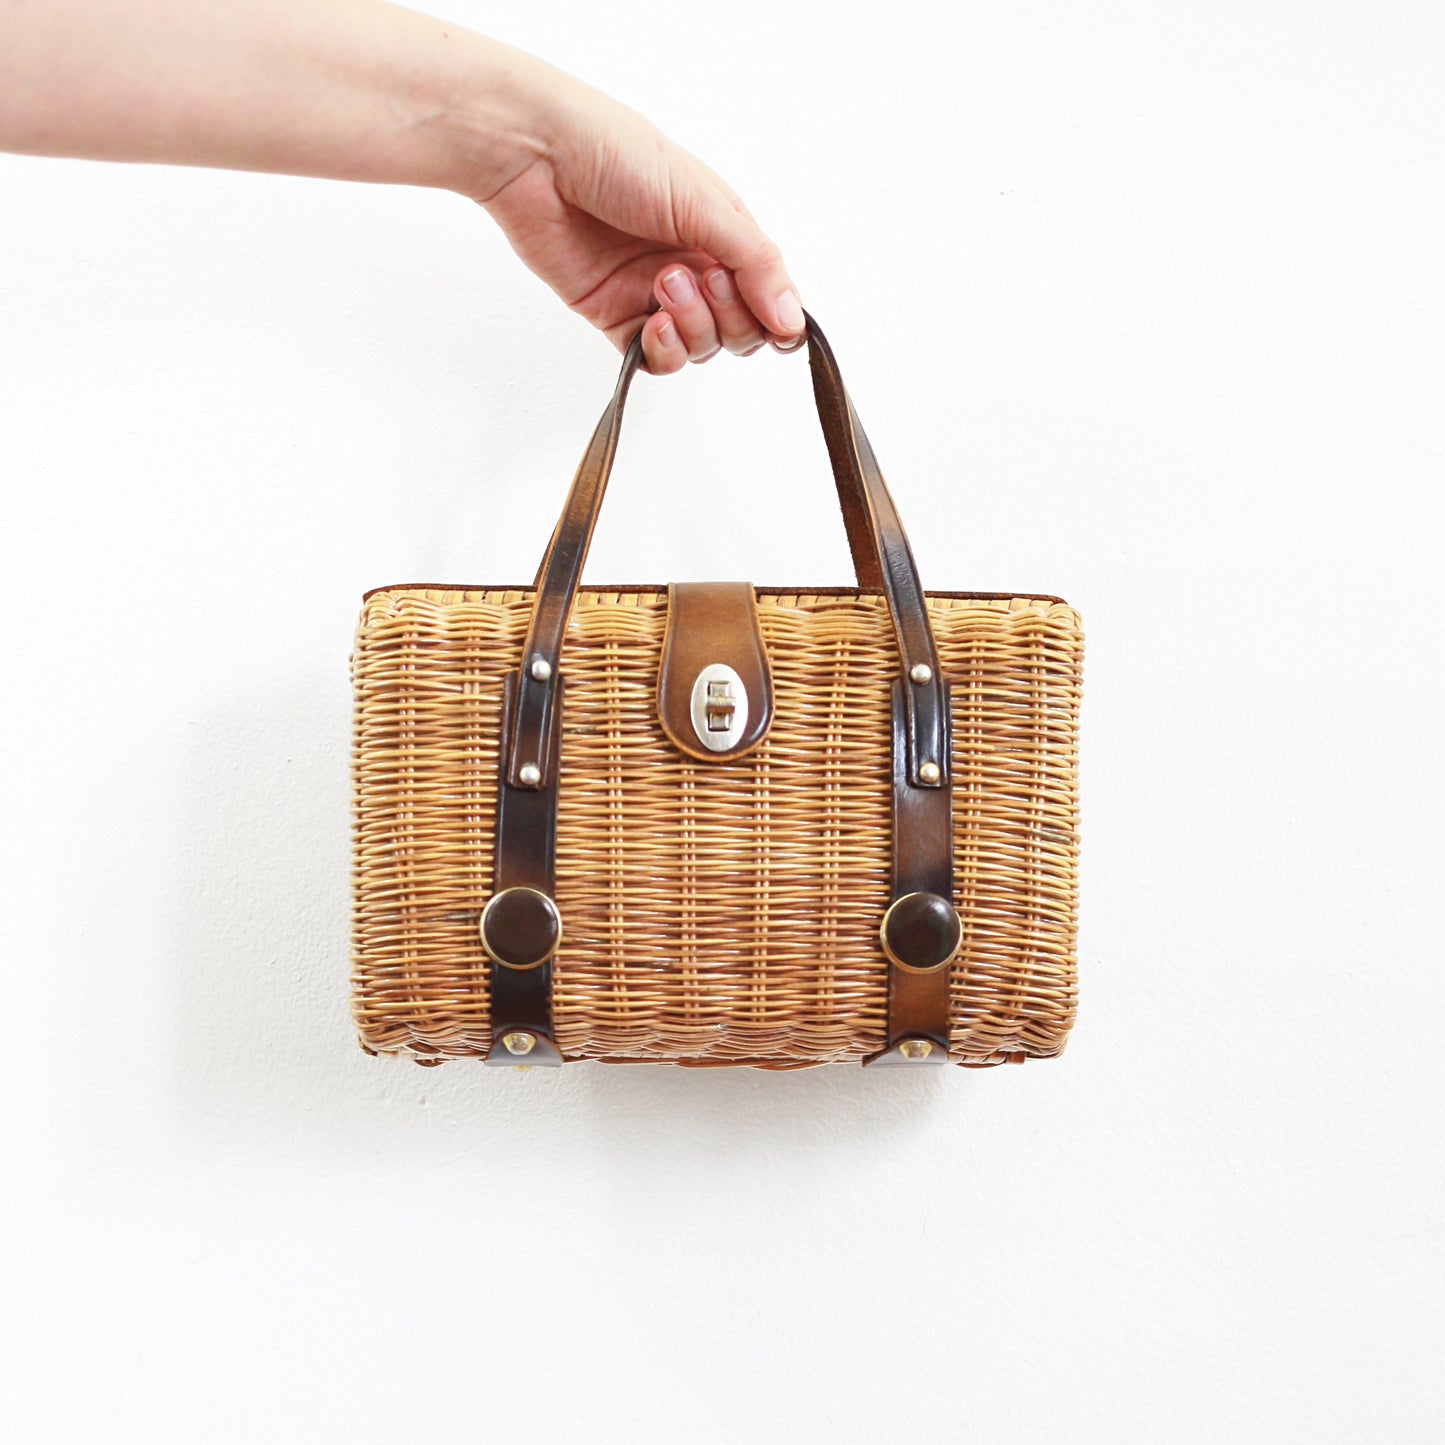 SOLD - Vintage Woven Basket Purse with Leather Accents